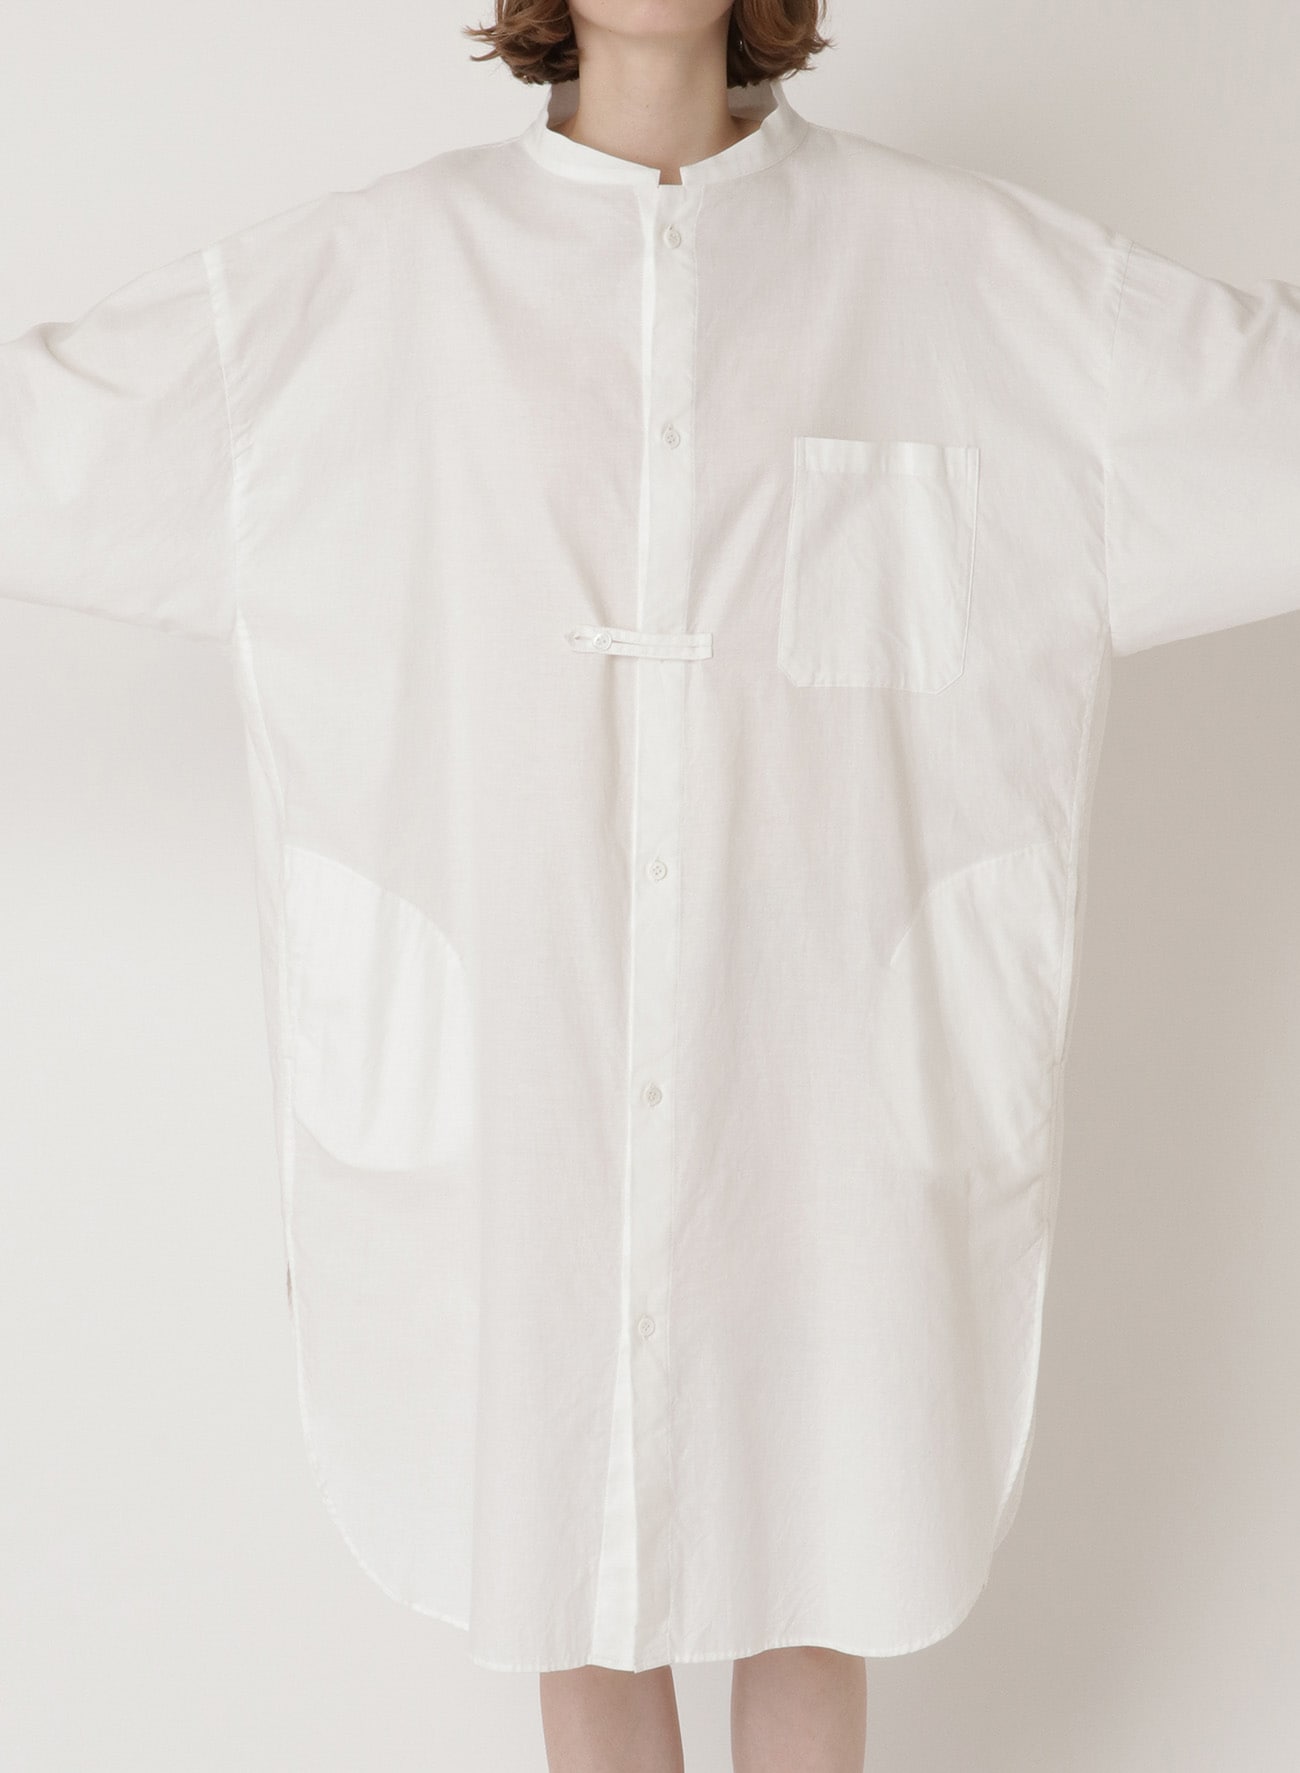 [Y's BORN PRODUCT]C/ THIN TWILL OUTER SHIRT DRESS